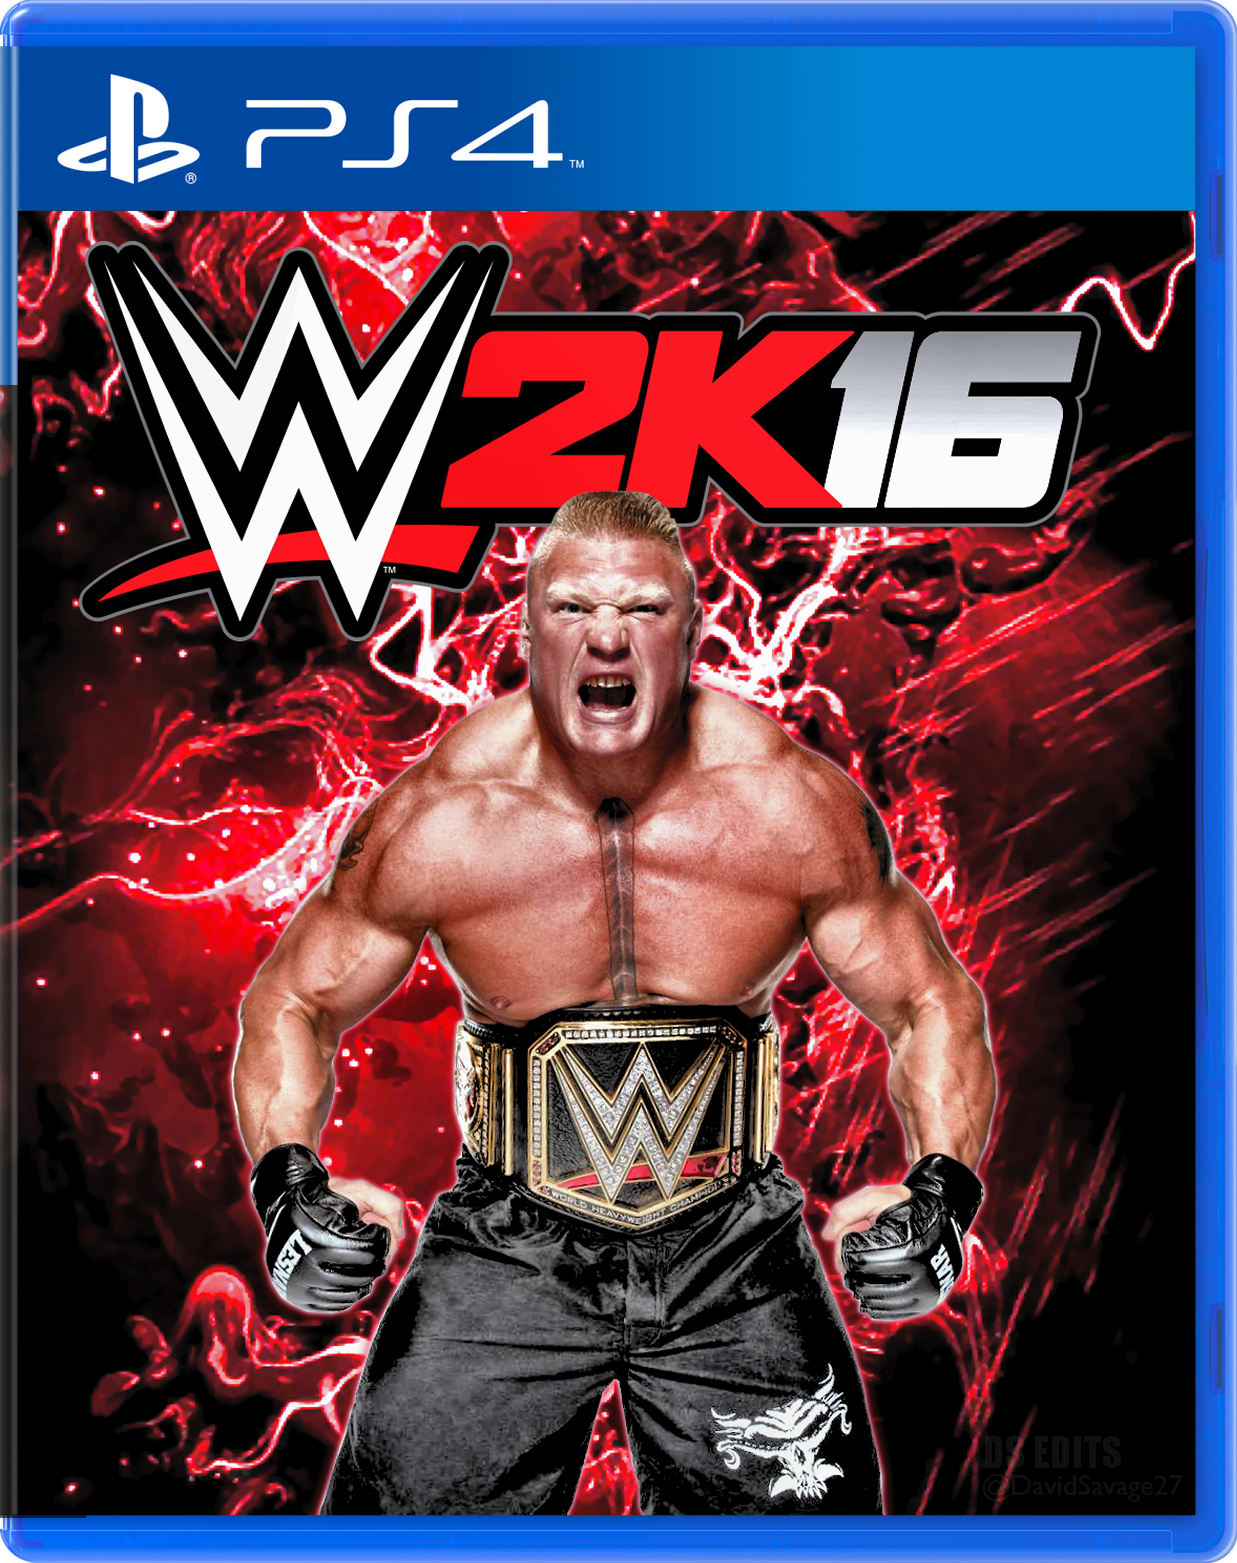 Free download Pin Wwe 2k16 Cover [1237x1563] for your Desktop, Mobile & Tablet. Explore WWE 2K16 Roster Wallpaper. WWE 2K16 Roster Wallpaper, WWE 2K16 Wallpaper, WWE 2K16 Wallpaper HD